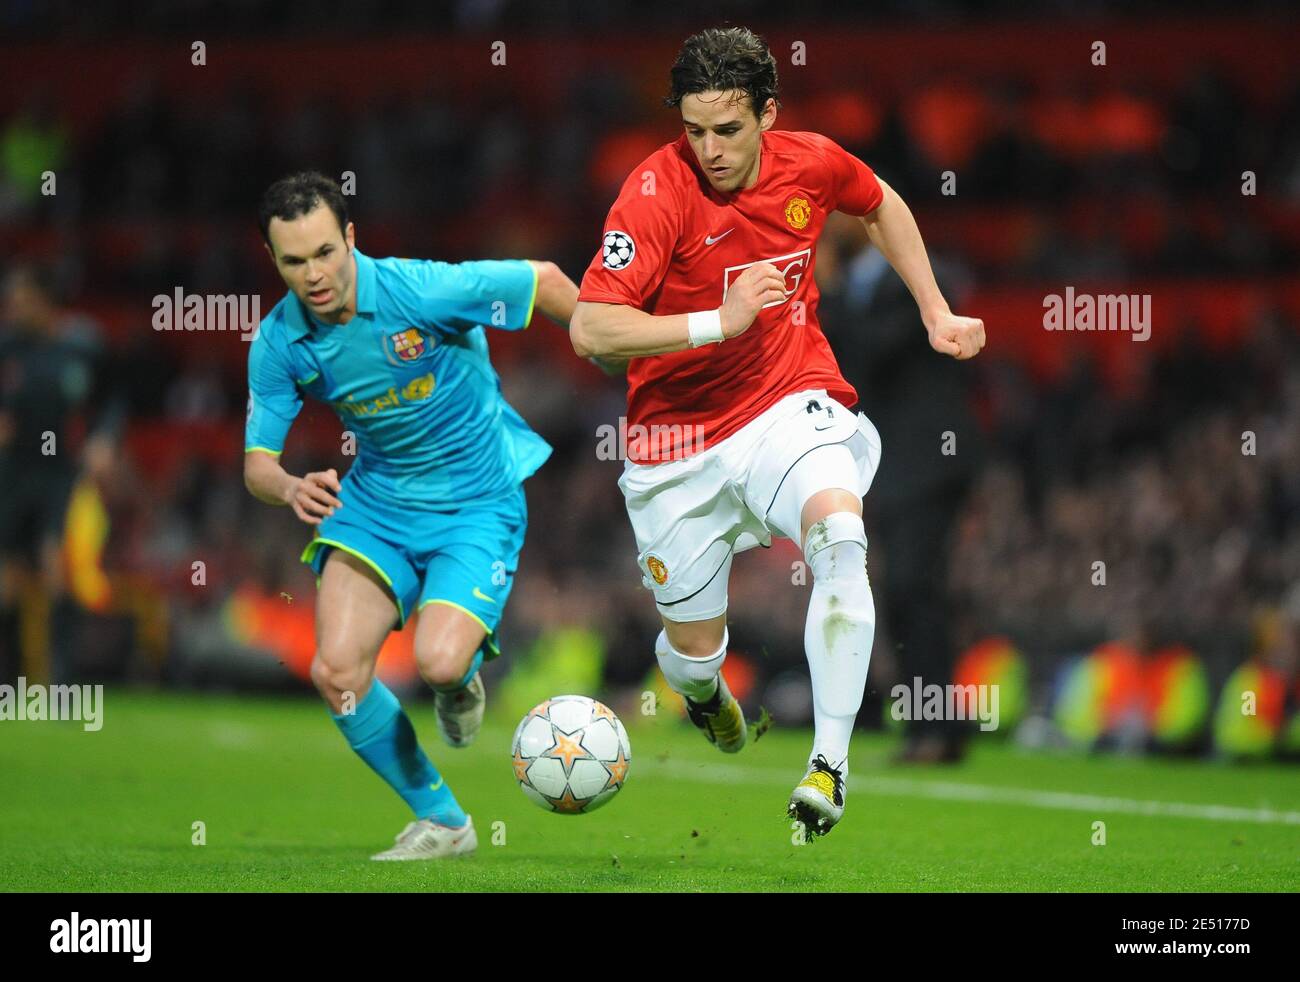 Manchester United'S Owen Hargreaves During The Uefa Champions League  Semi-Final Second Leg Soccer Match Between Manchester United And Fc  Barcelona At Old Trafford In Manchester, England On April 29 2008.  Manchester Won